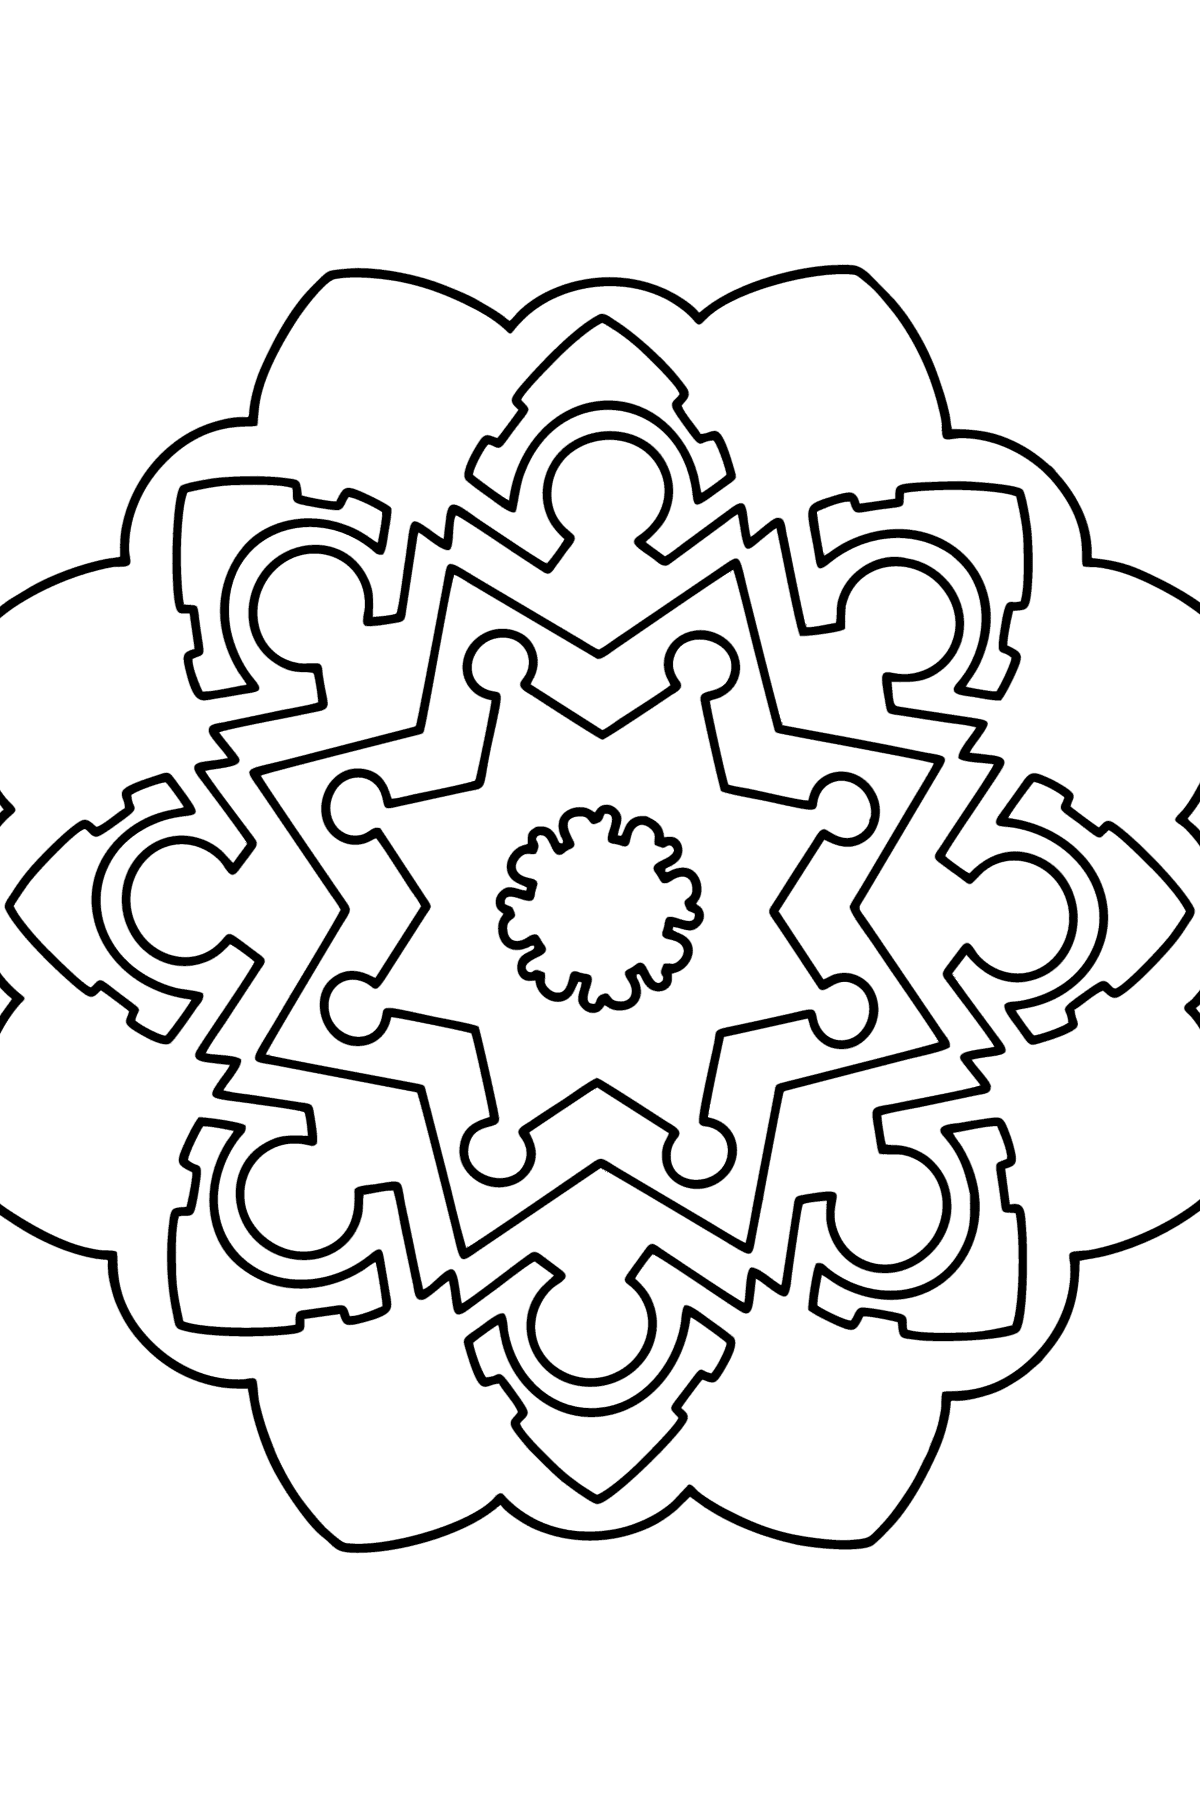 Mandala coloring page - 13 parts - Coloring Pages for Kids